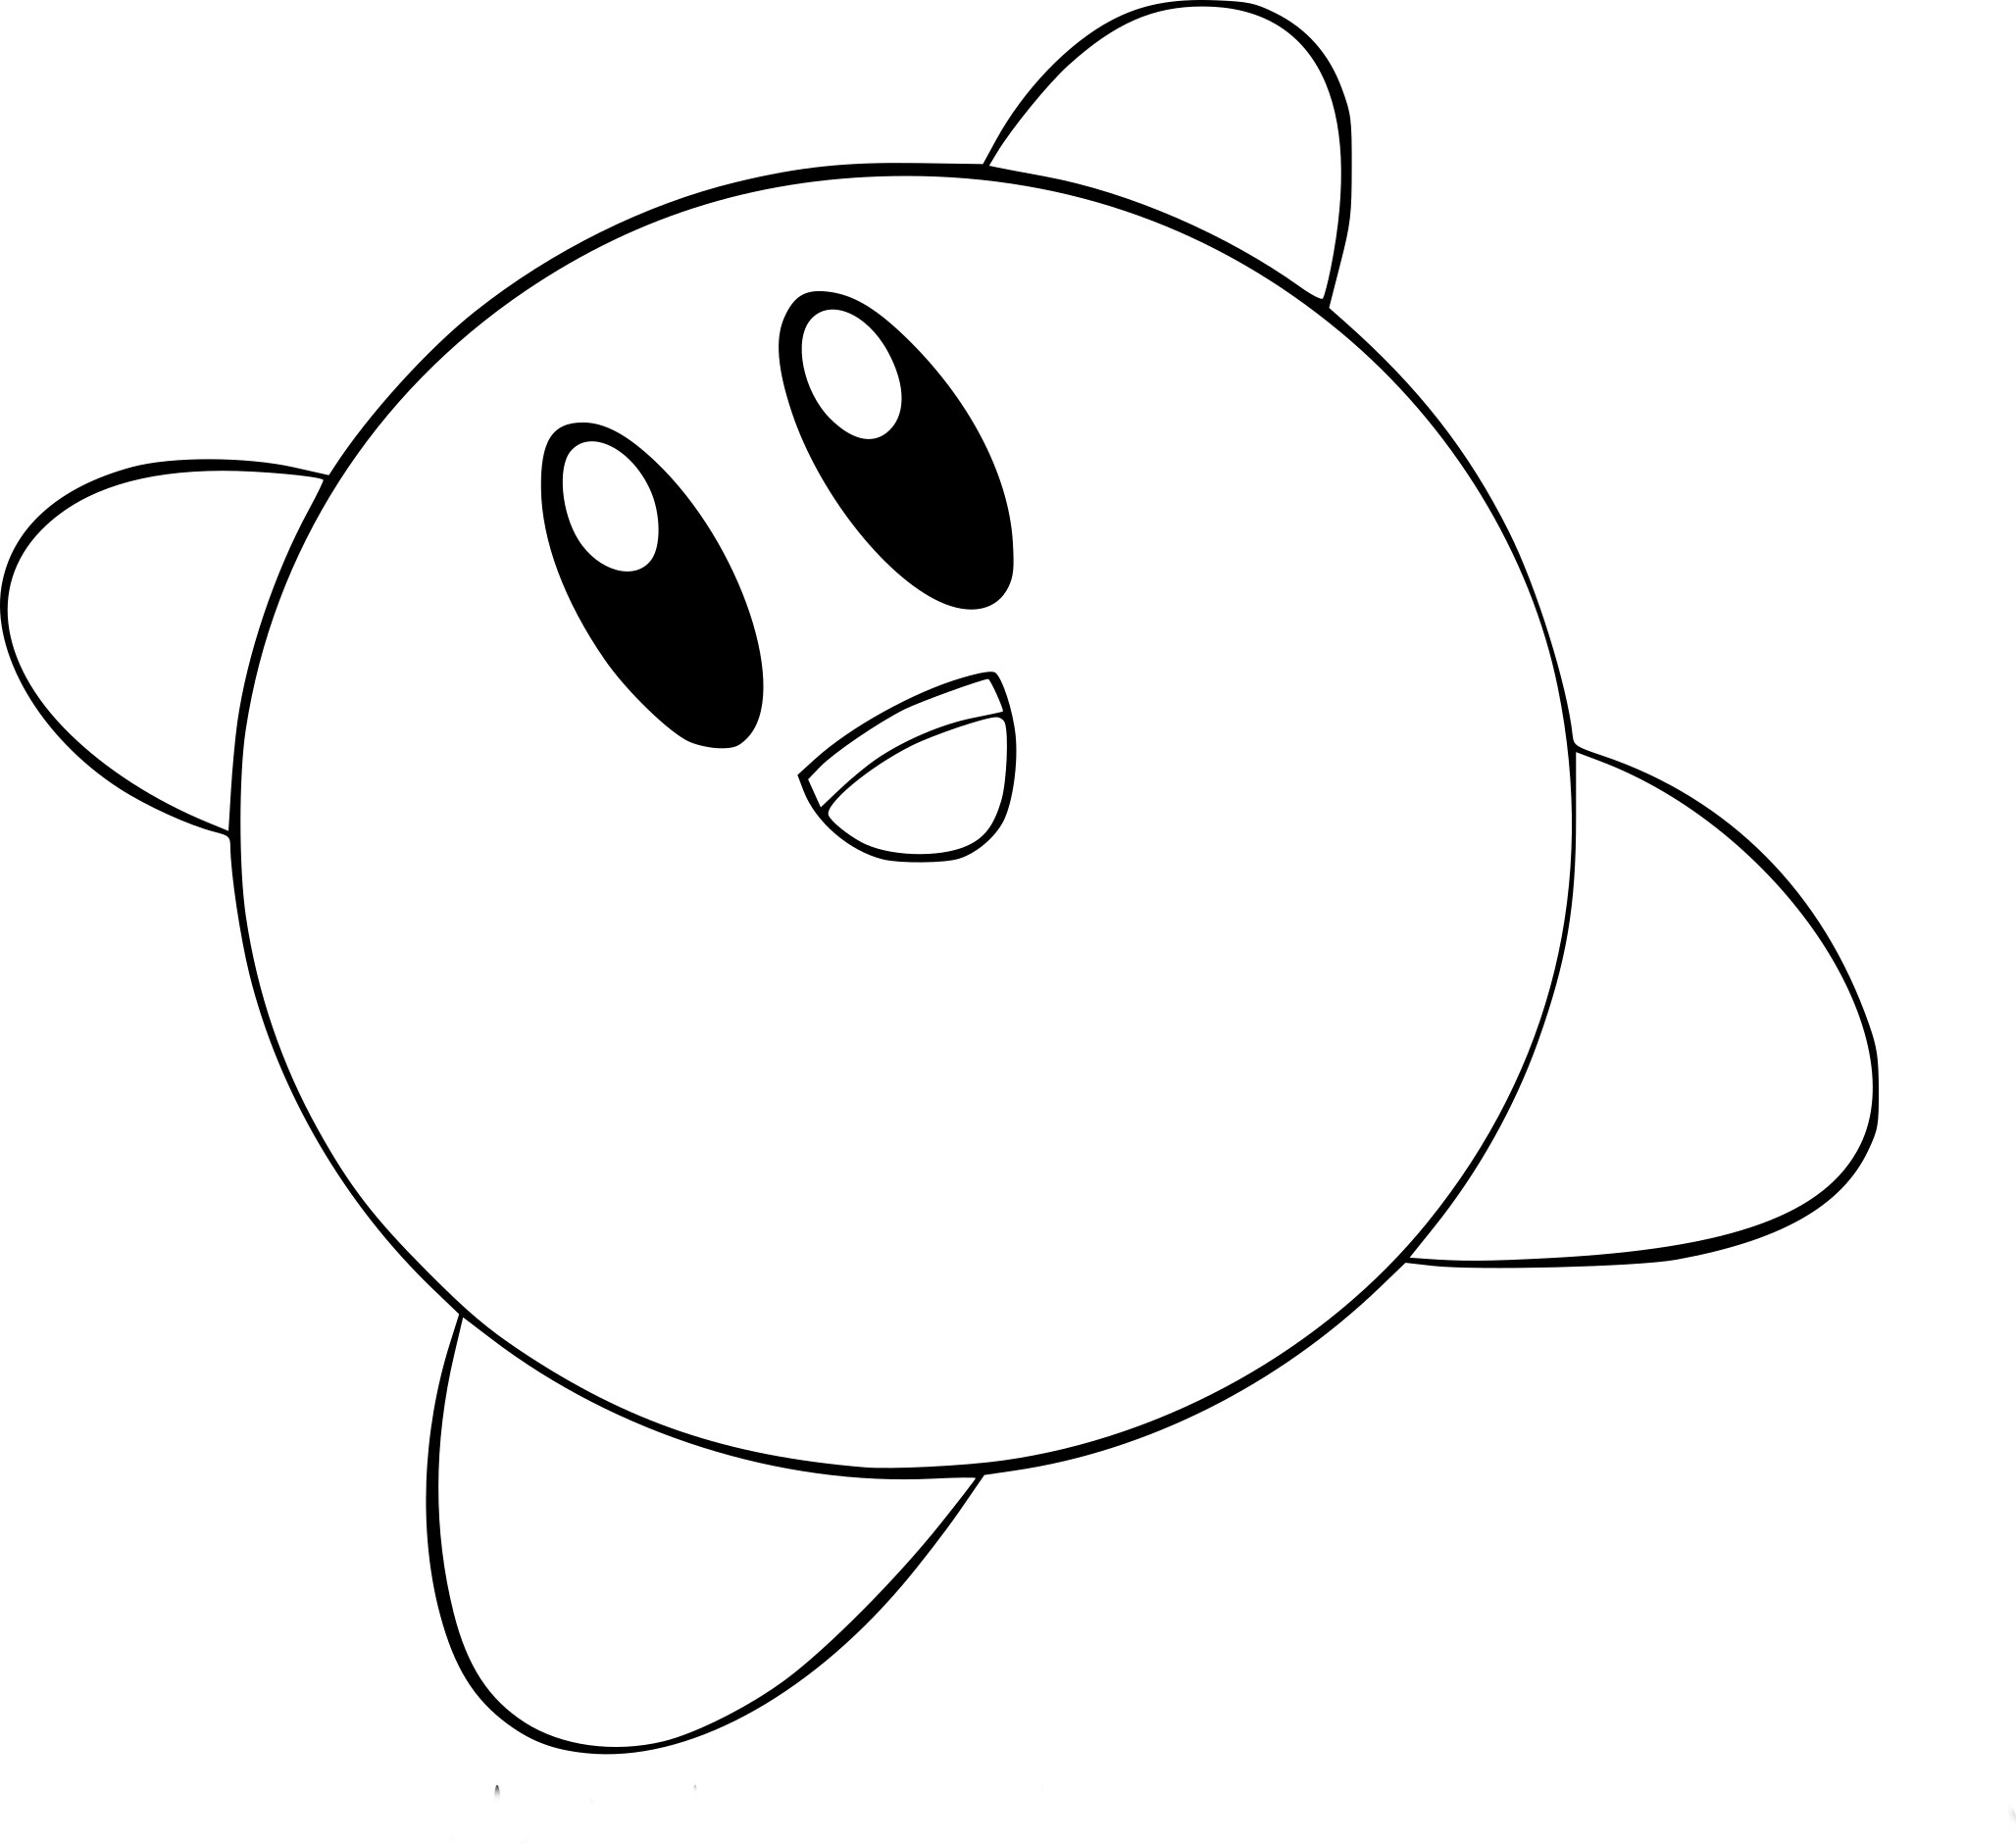 Kirby Super Smash Bros coloring page